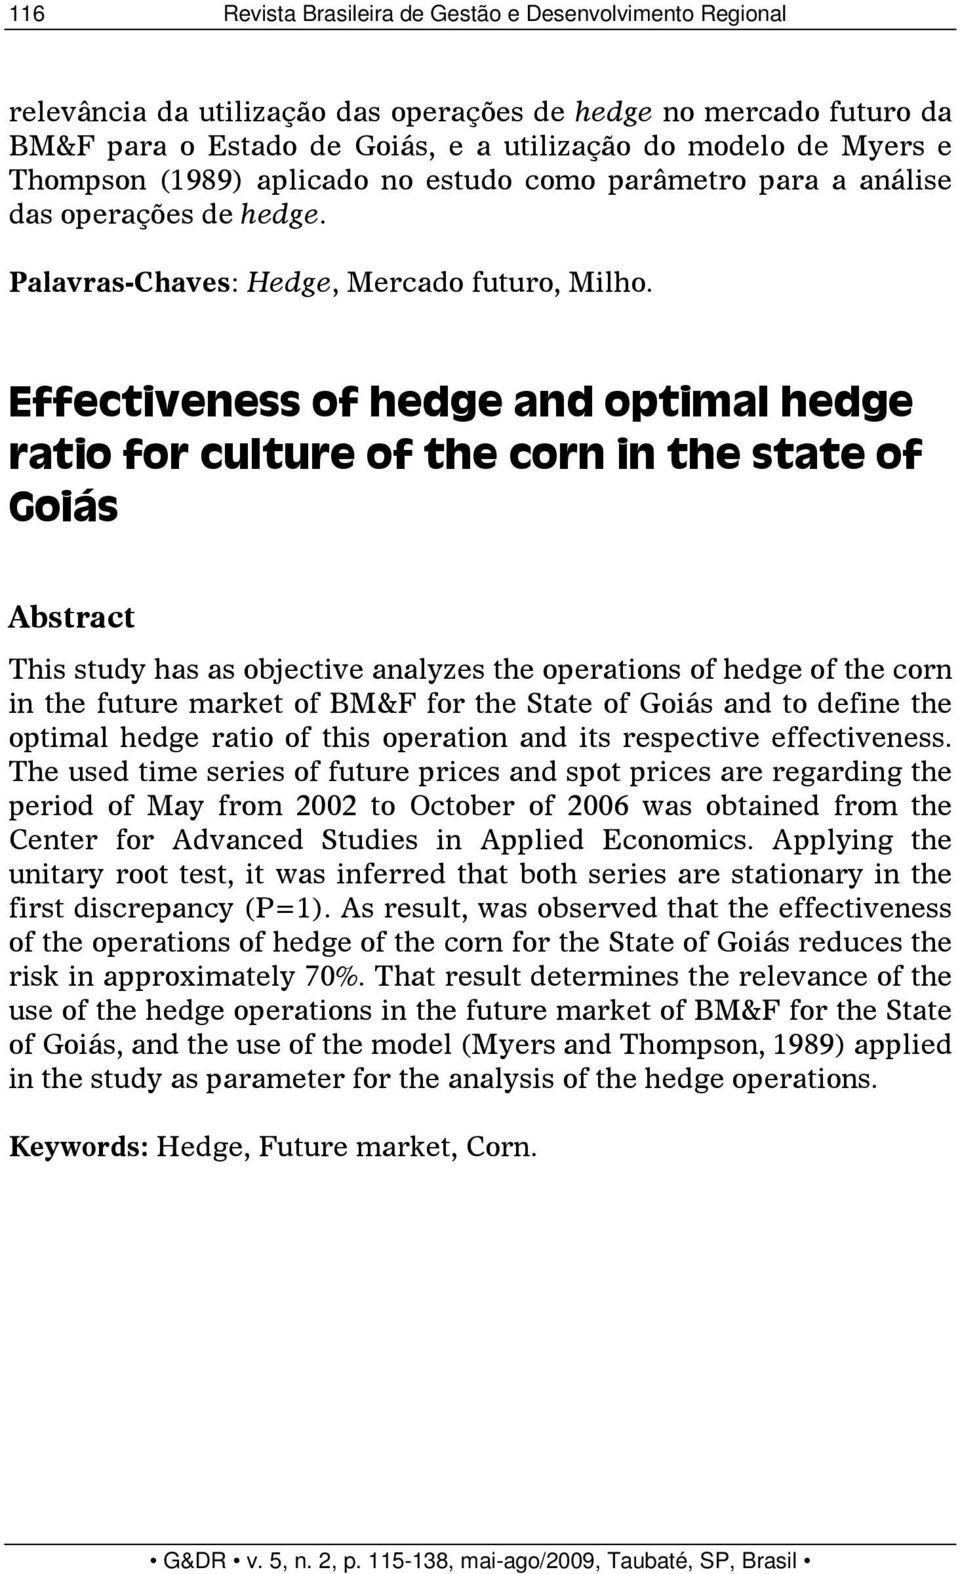 Effectiveness of hedge and optimal hedge ratio for culture of the corn in the state of Goiás Abstract This study has as objective analyzes the operations of hedge of the corn in the future market of